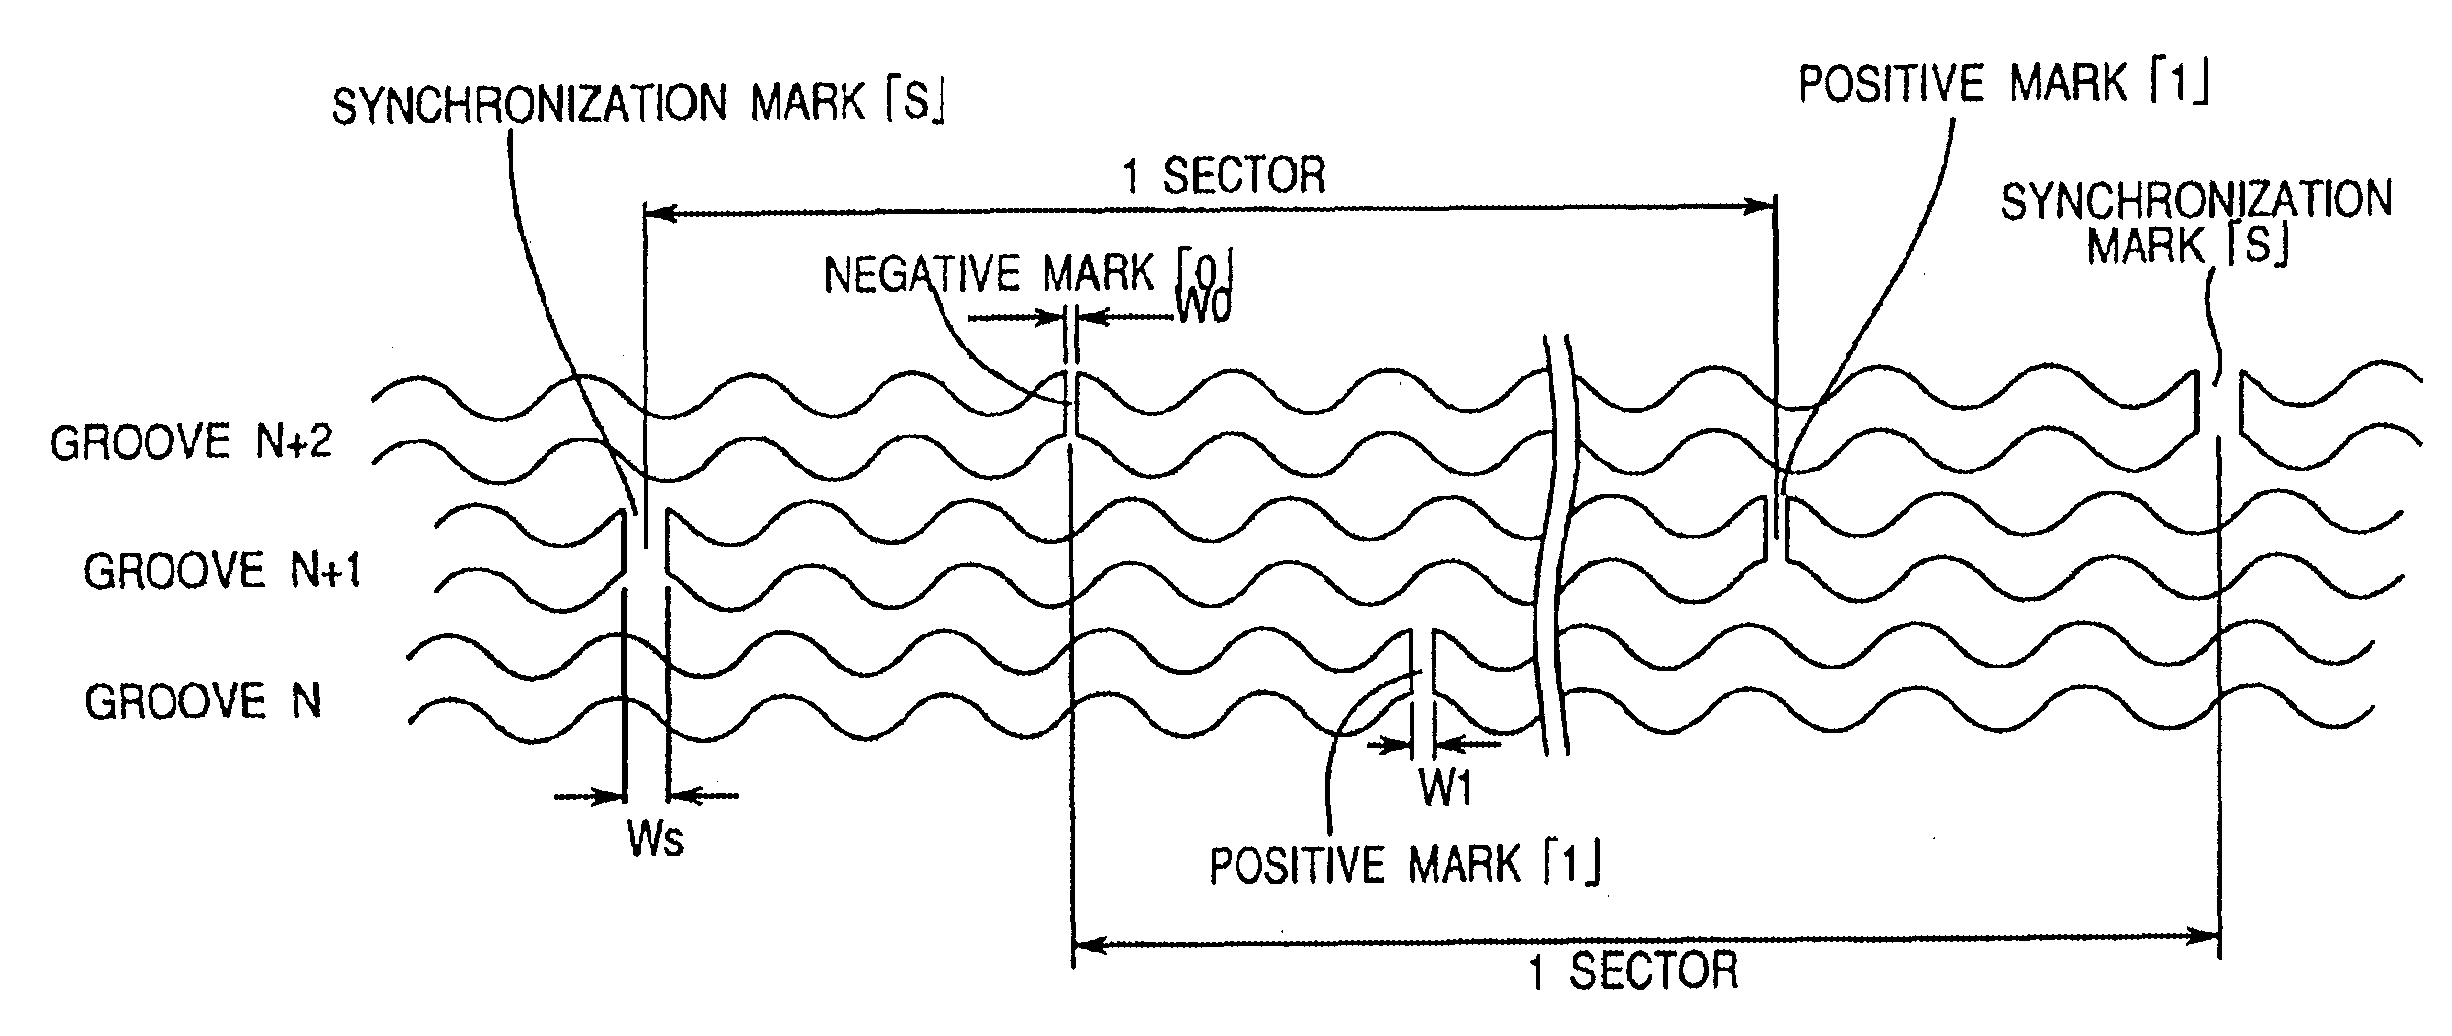 Optical disc having positive marks and negative marks in a sector block